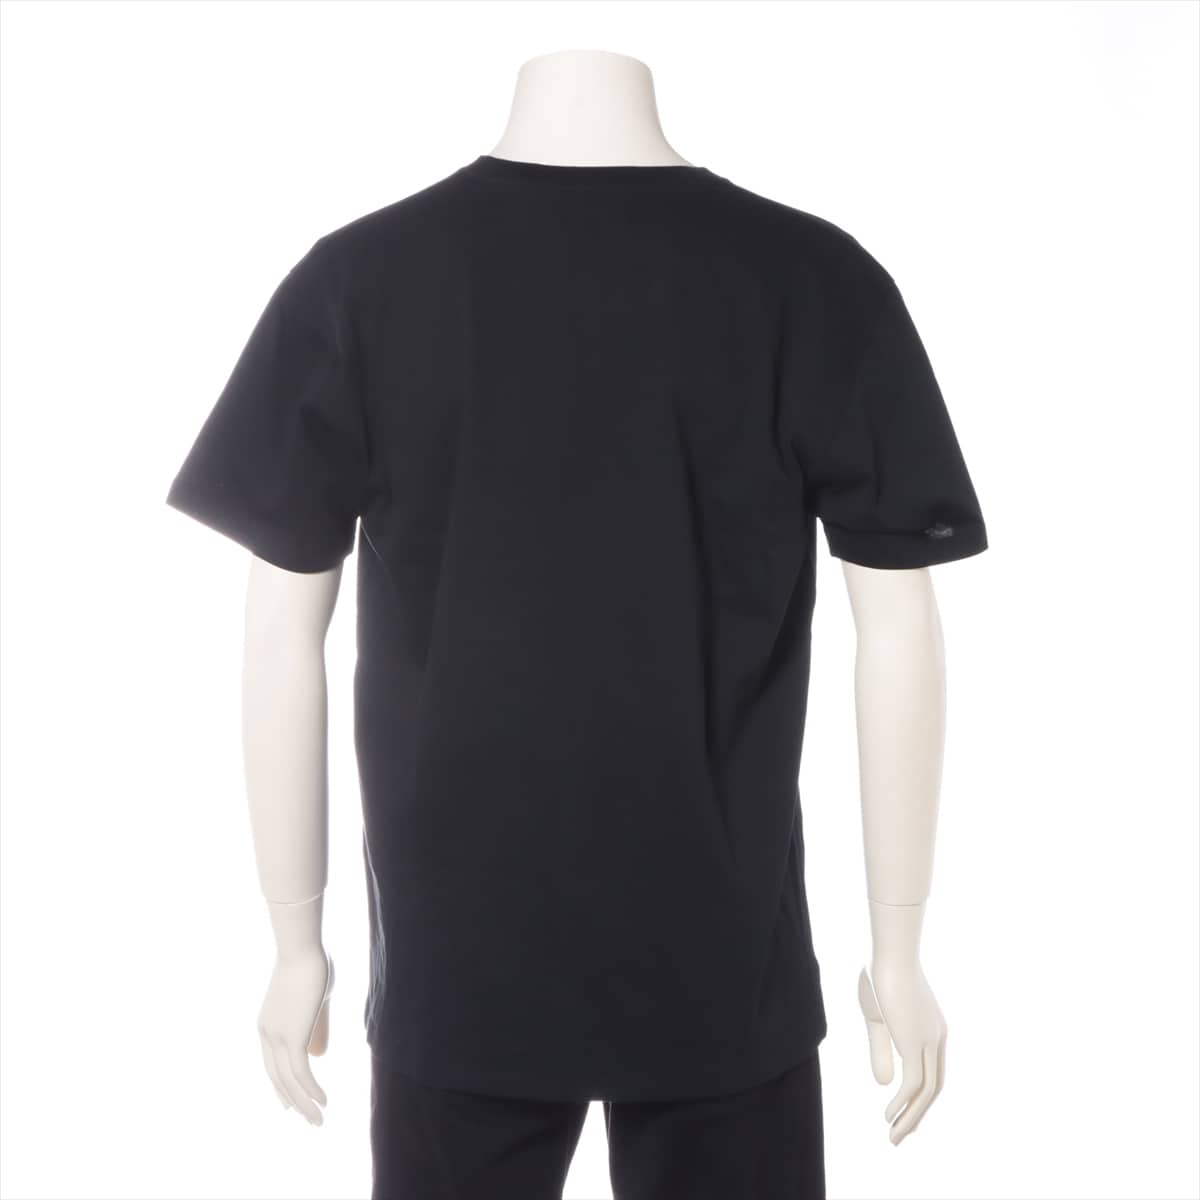 Gucci x North Face Cotton T-shirt S Men's Black 615044｜a1262948｜ALLU UK｜The  Home of Pre-Loved Luxury Fashion